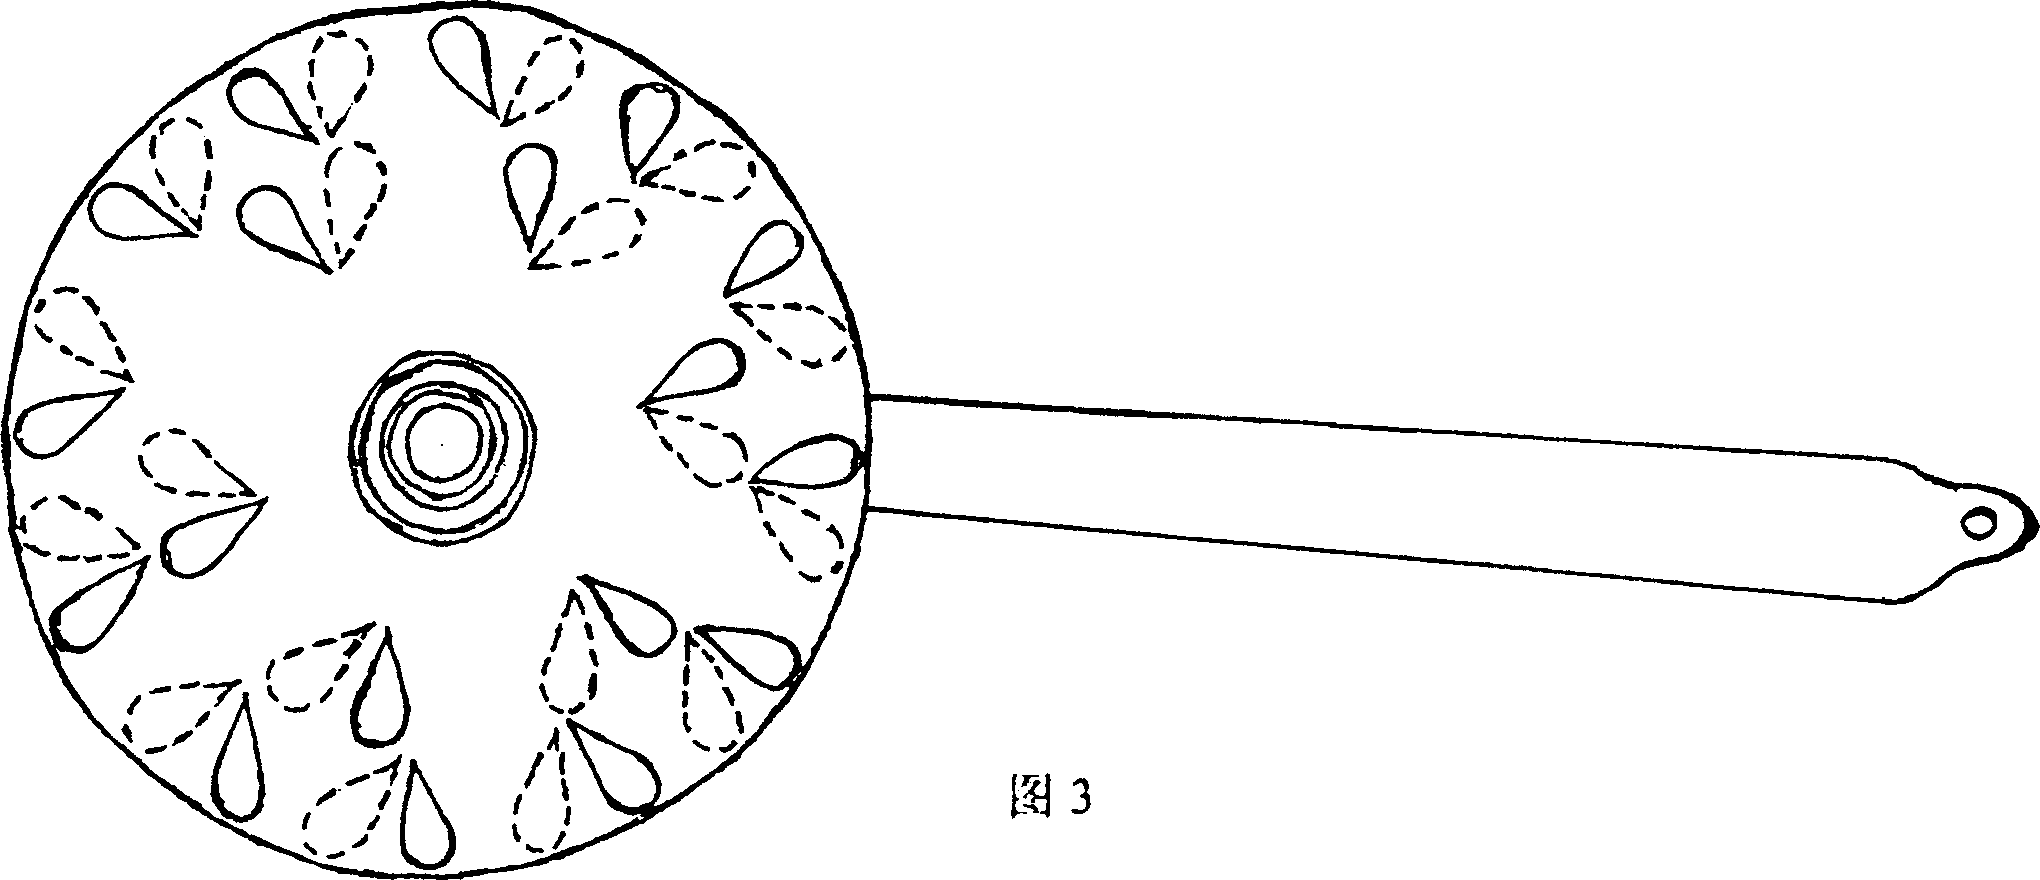 Wicker or wire strainer with adjustable water-logging holes